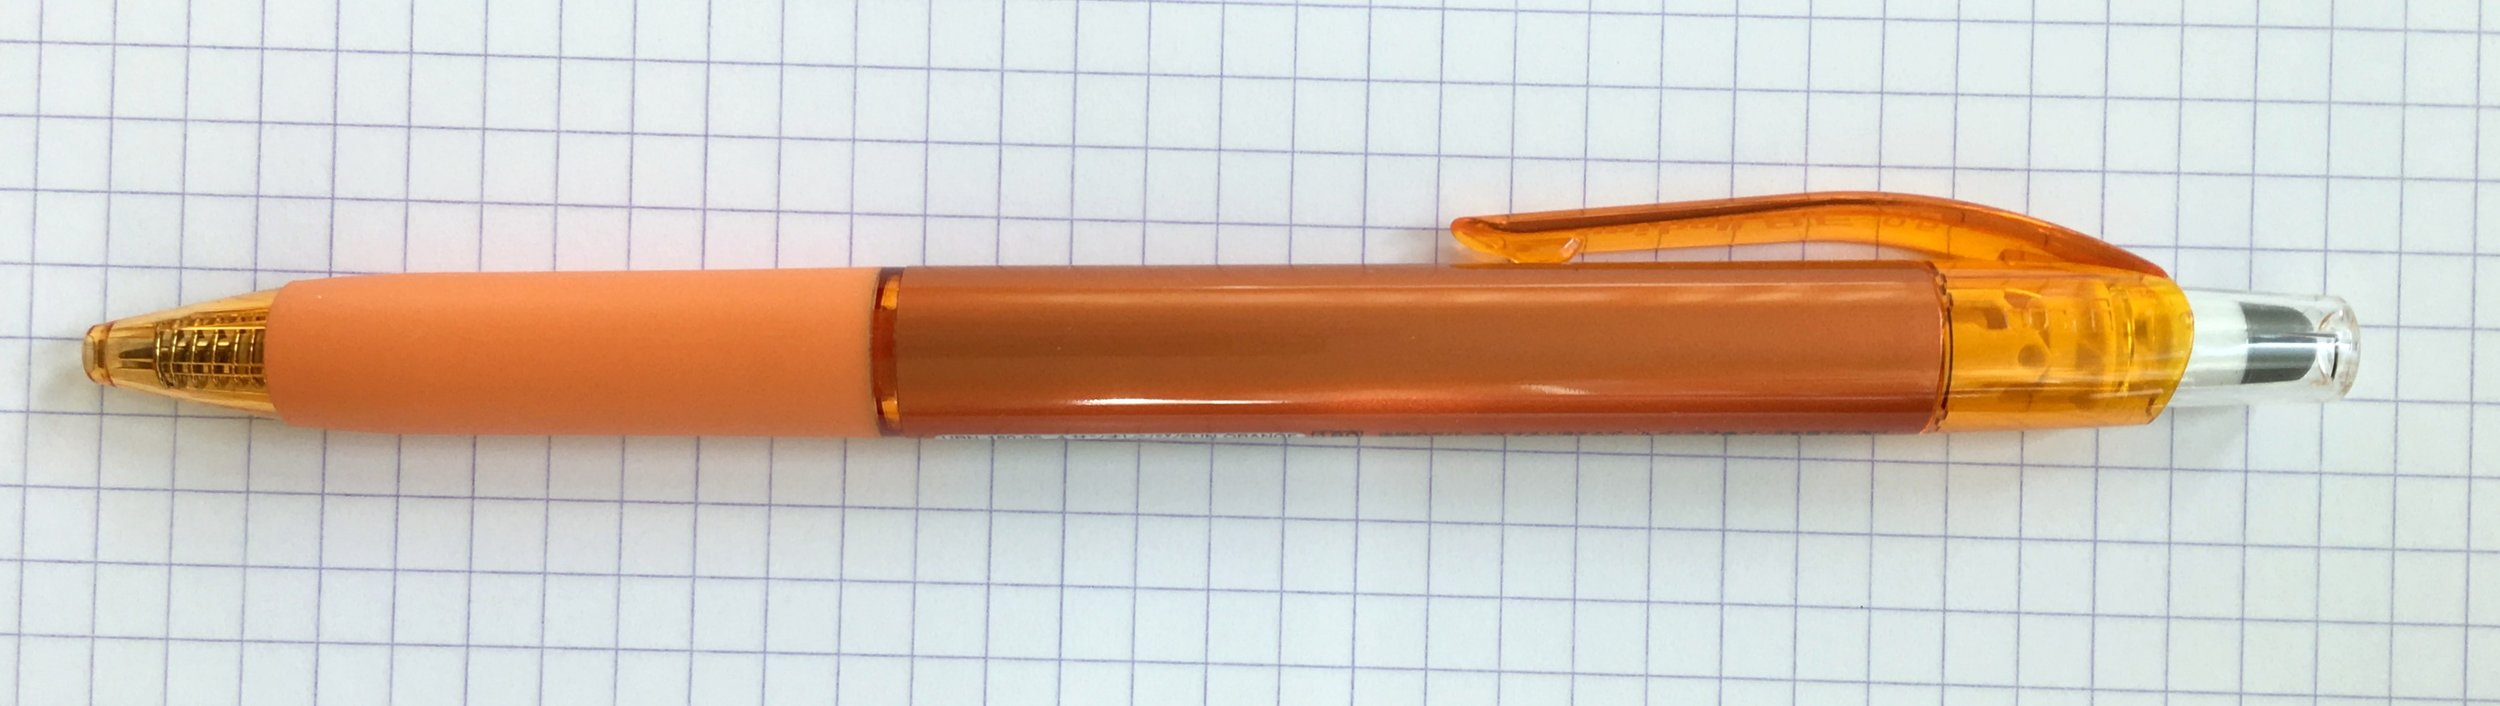 Are Uniball Pens Well Liked? : r/pens